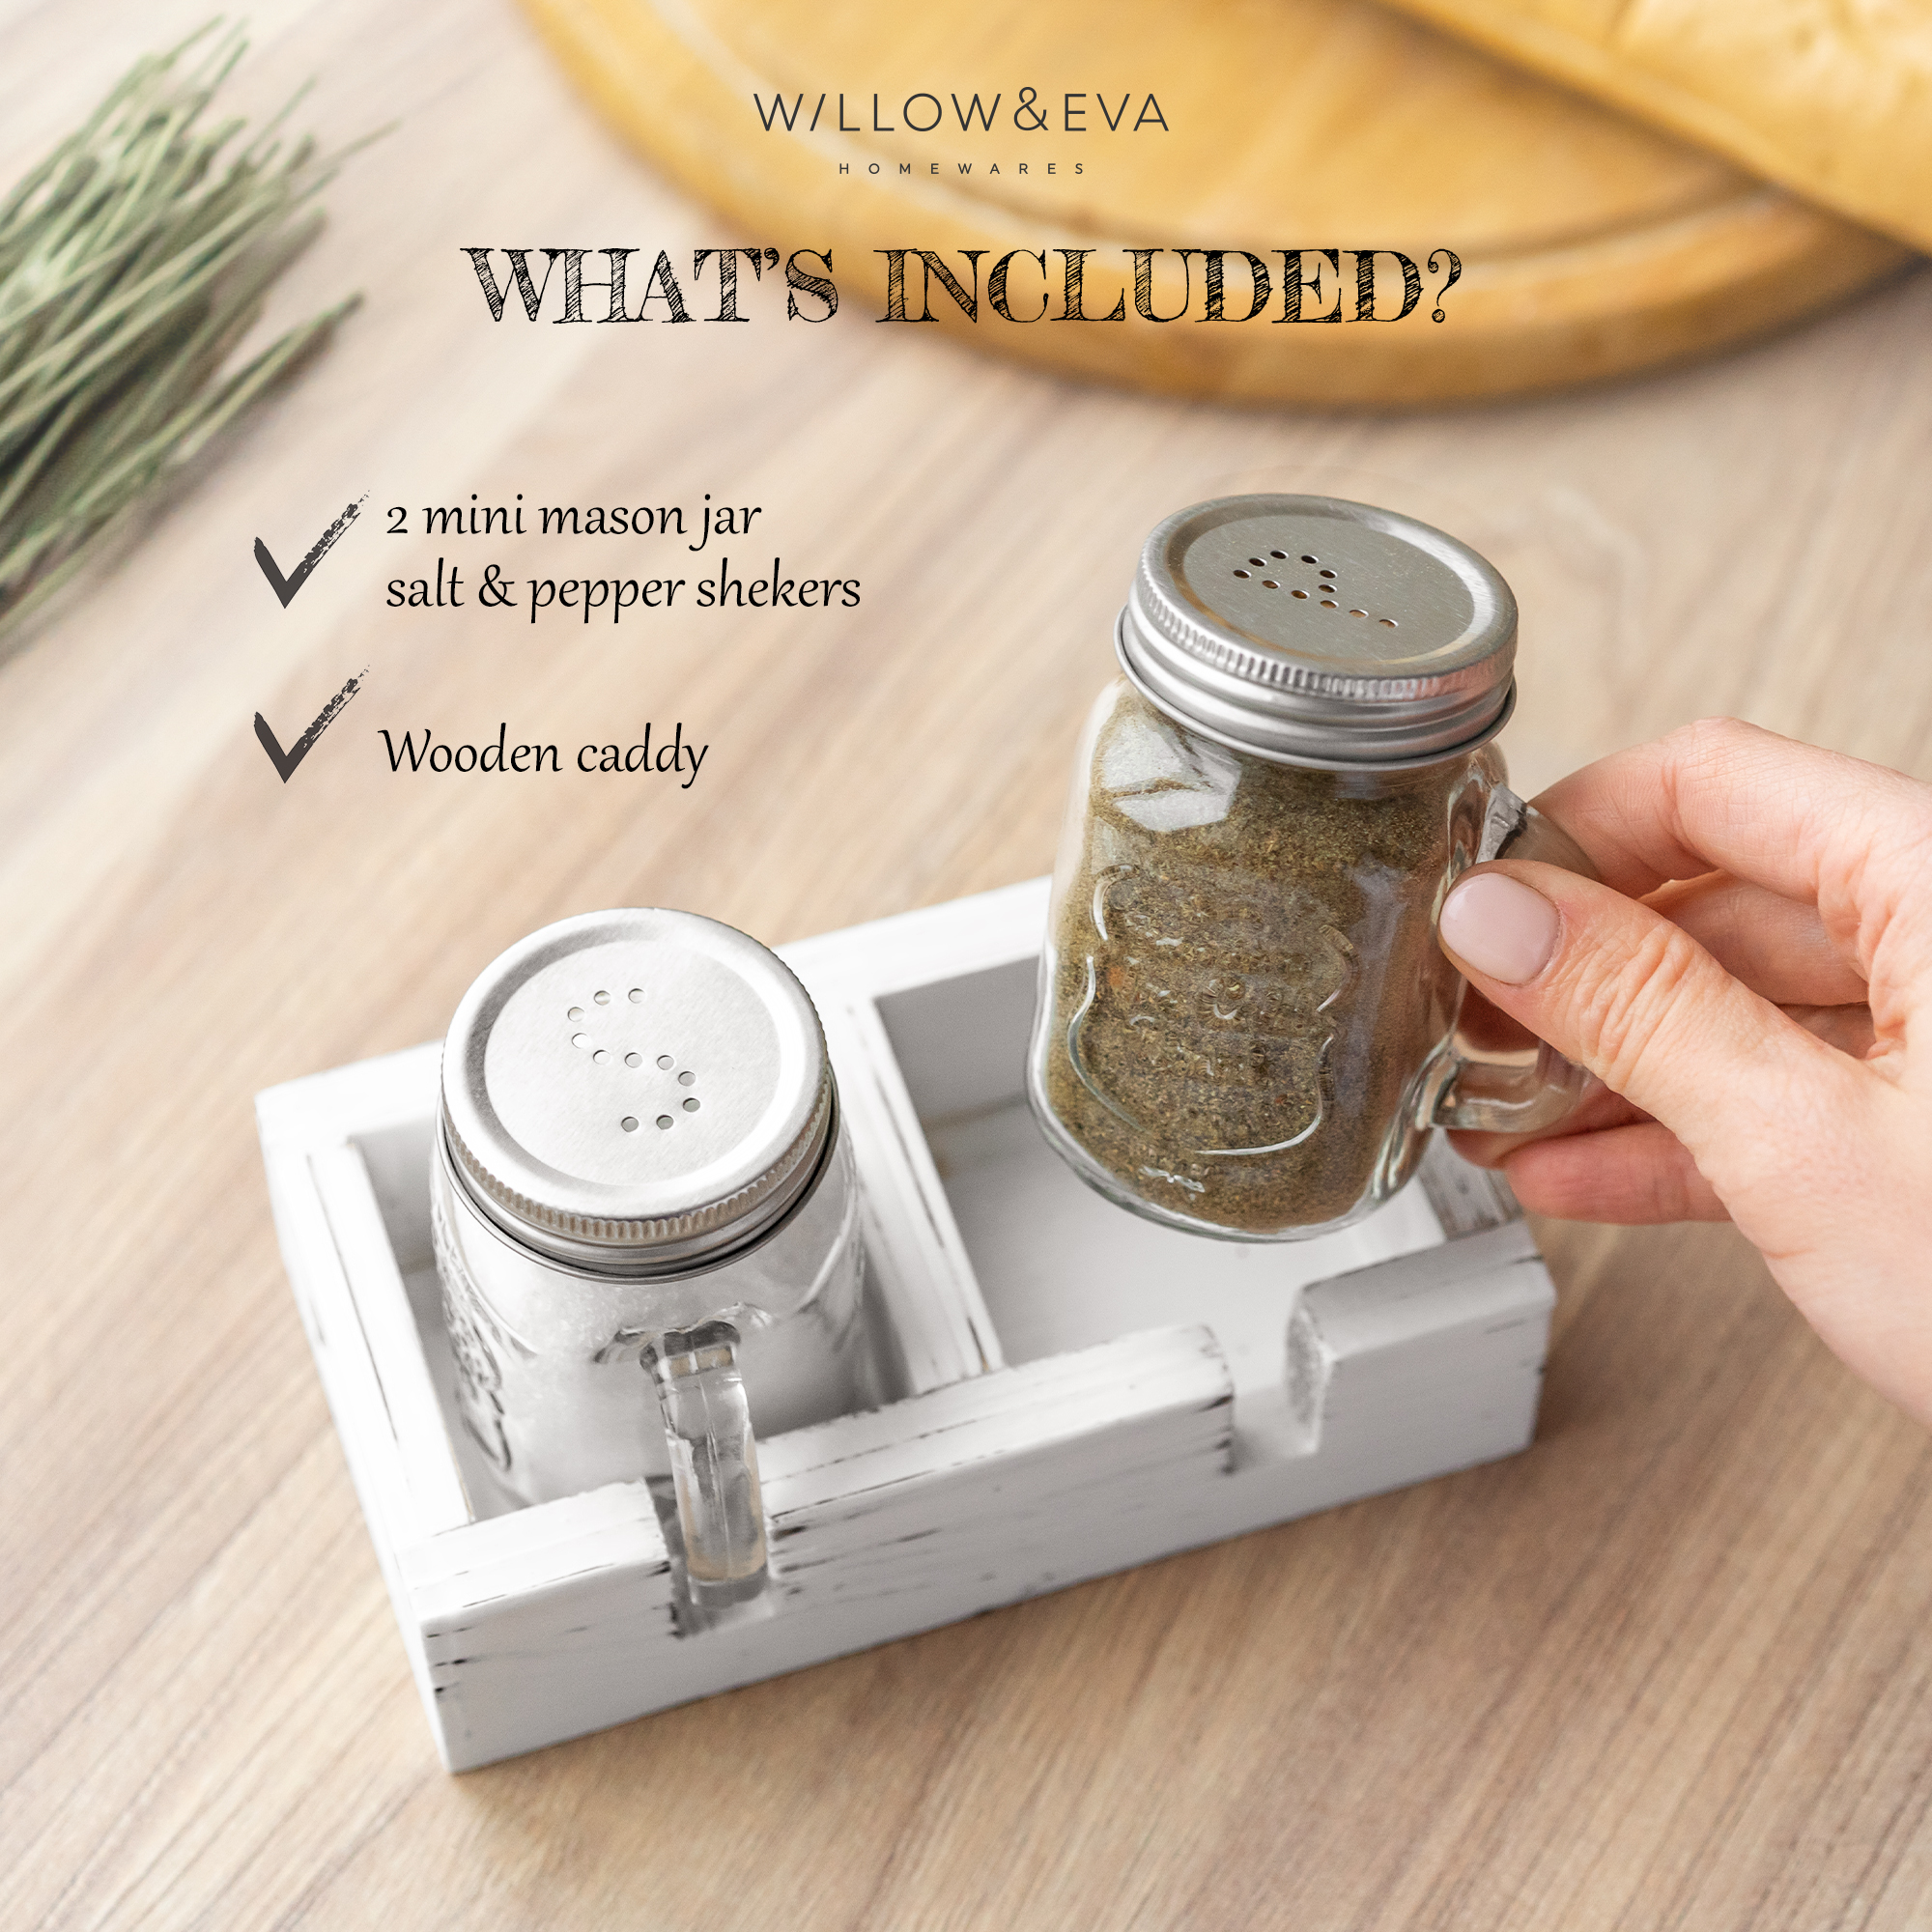 Willow & Everett Premium Salt and Pepper Shakers with Adjustable Pour Holes - Elegant Stainless Steel Salt and Pepper Dispenser - Perfect for